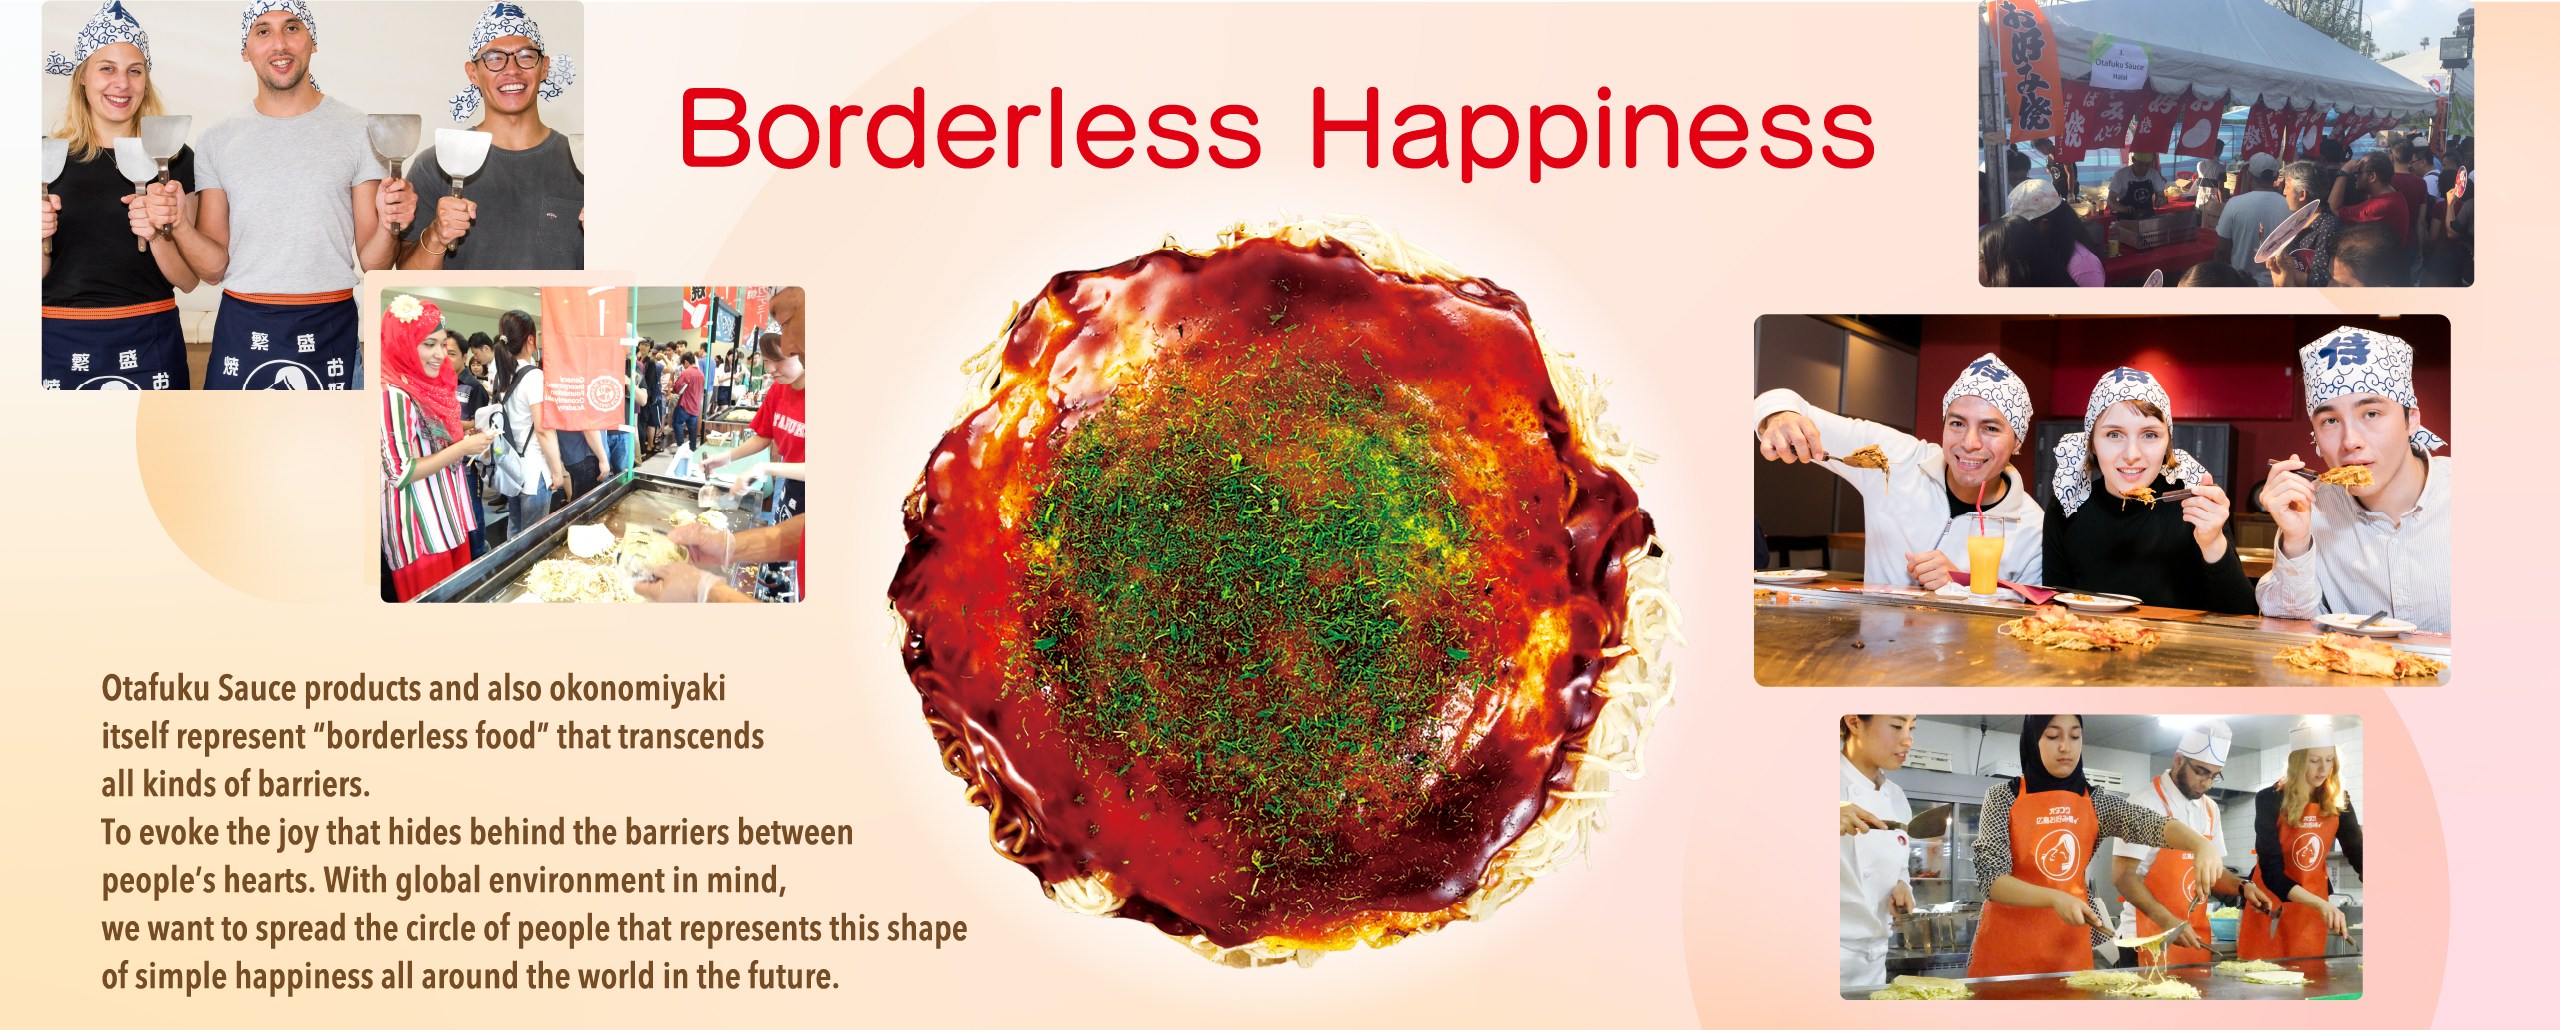 Borderless Happiness Otafuku Sauce products and also okonomiyaki itself represent “borderless food” that transcends all kinds of barriers. To evoke the joy that hides behind the barriers between people’s hearts. With global environment in mind, we want to spread the circle of people that represents this shape of simple happiness all around the world in the future.